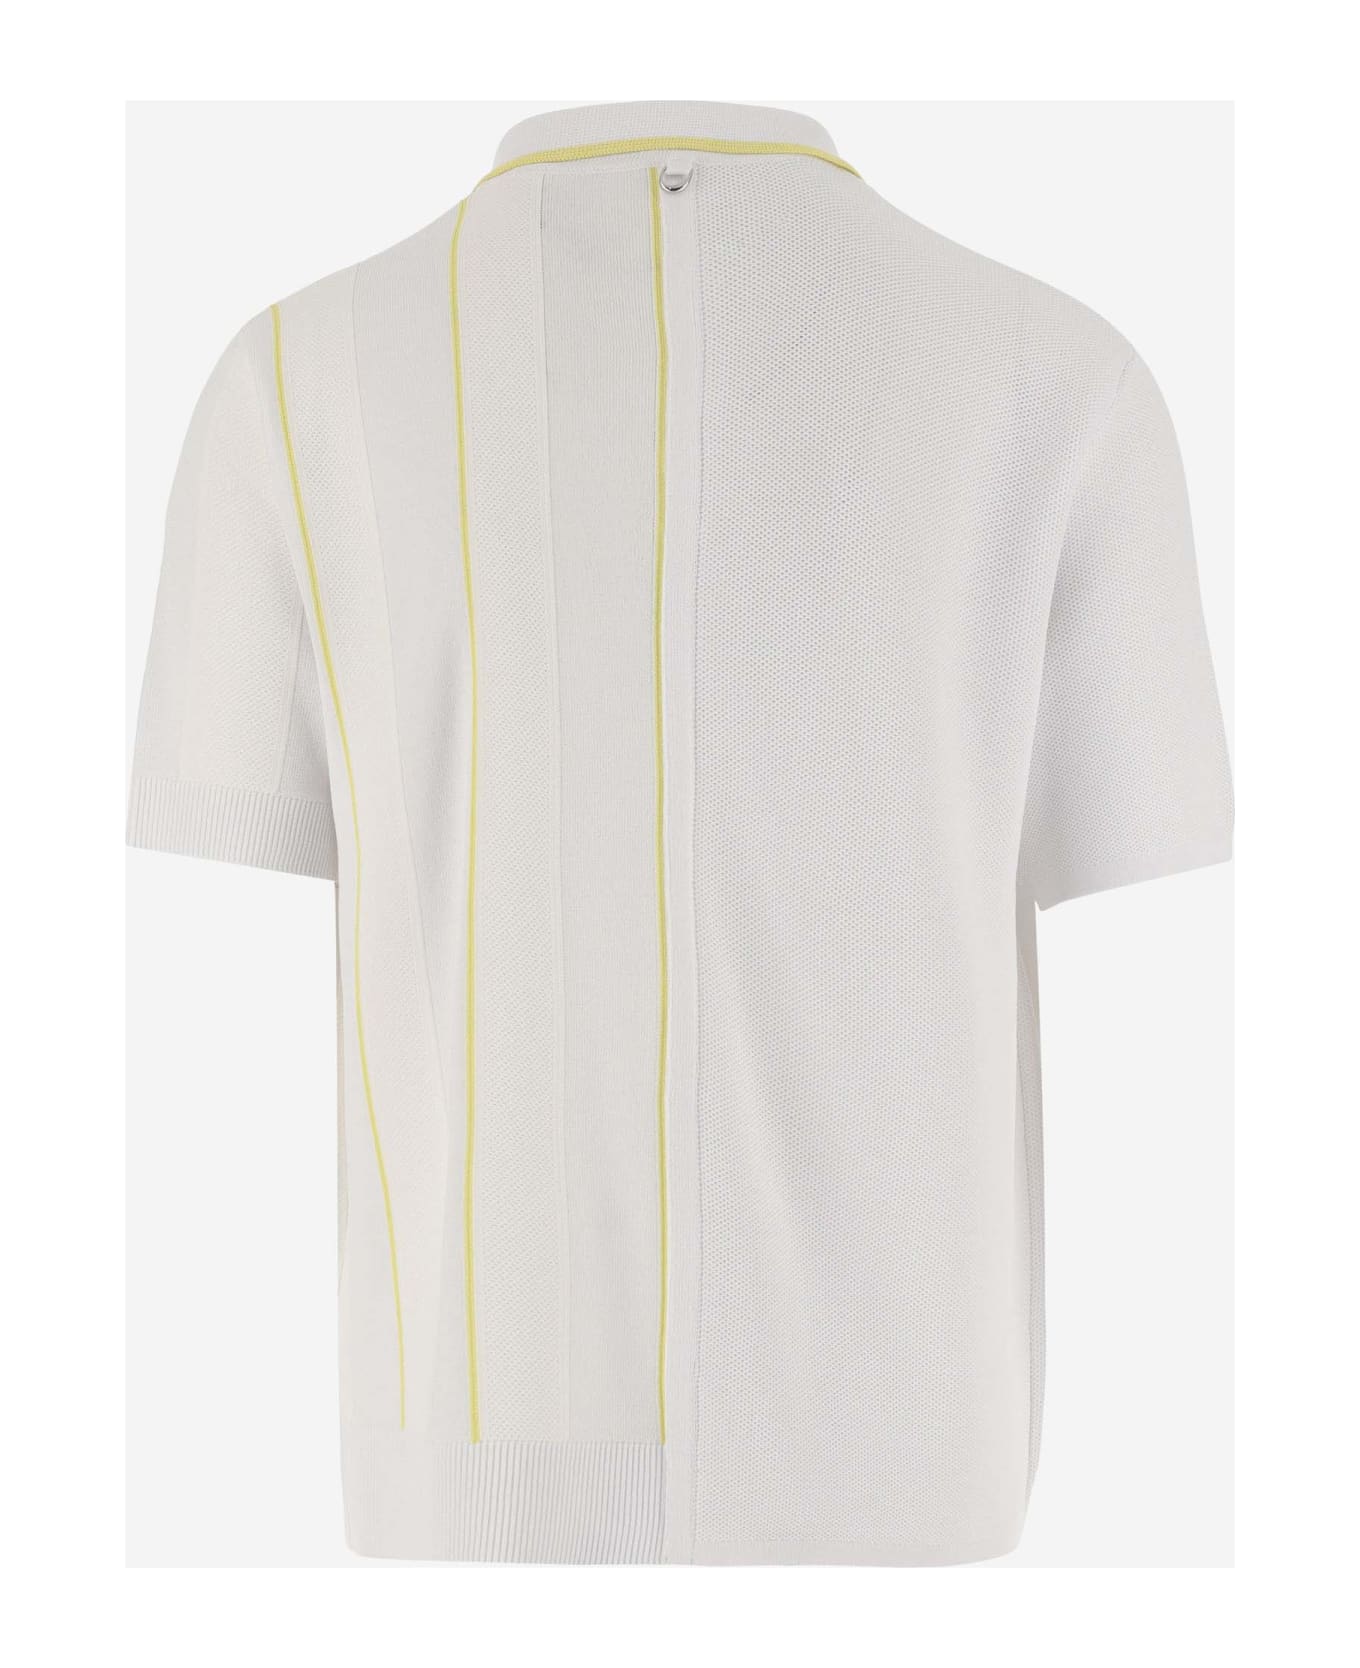 Jacquemus Contrast Knitted Polo Shirt - White